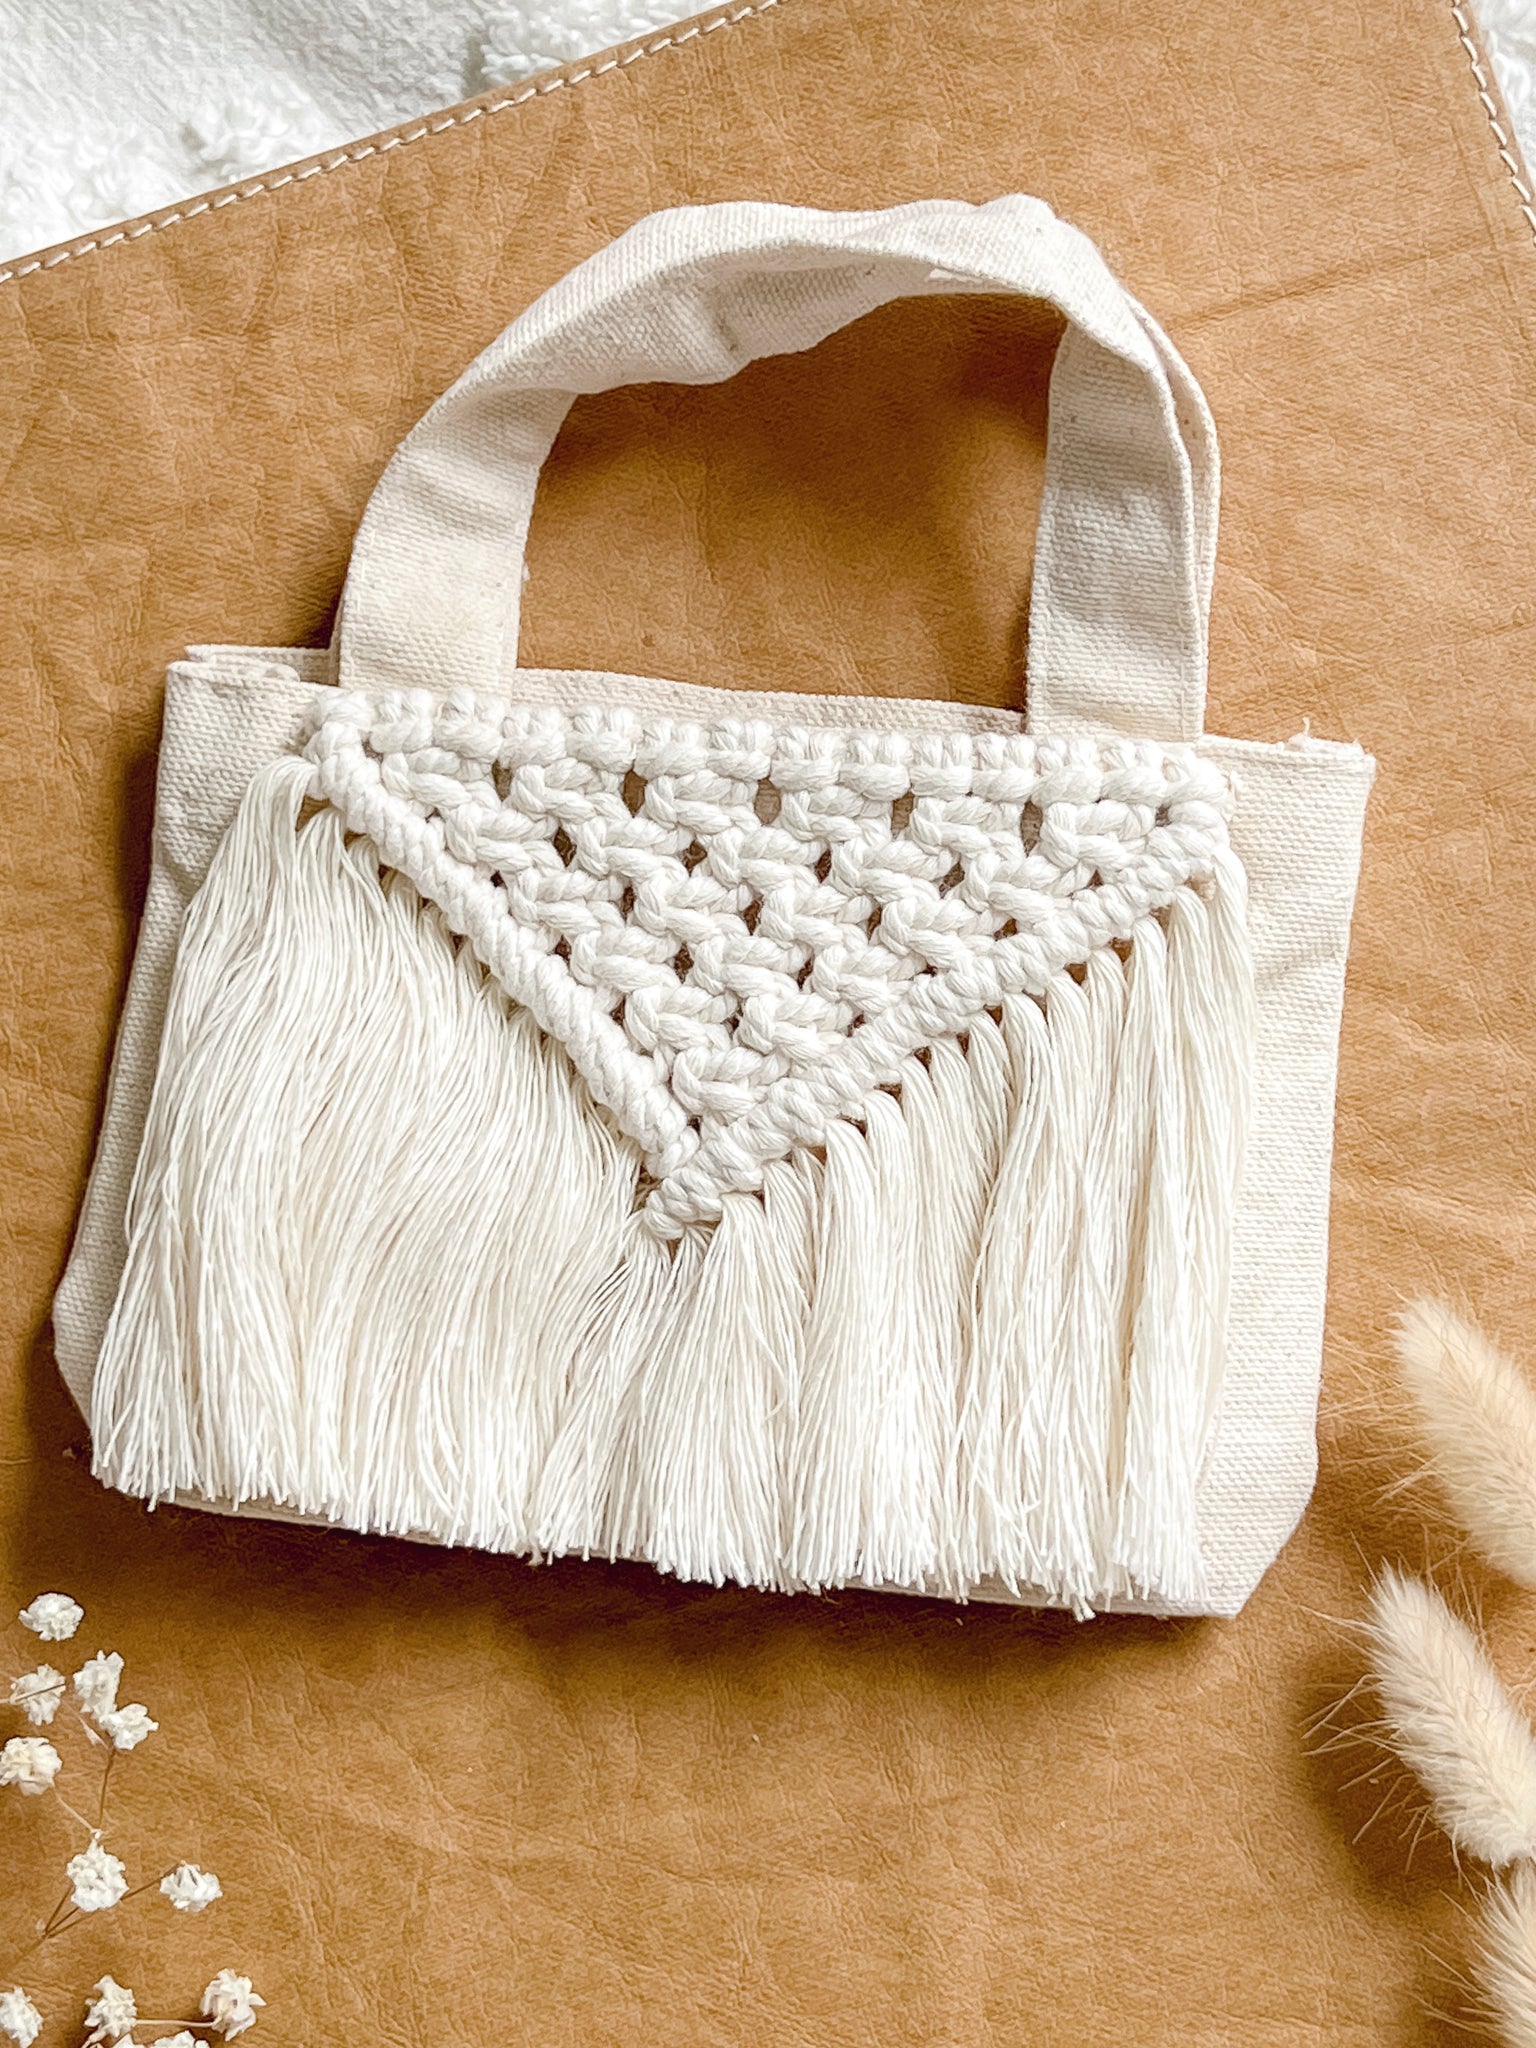 Boho Chic Woven Straw Boho Shoulder Bag With Tassel Perfect For Evening,  Beach, And Crossbody Wear From Liyann, $11.07 | DHgate.Com